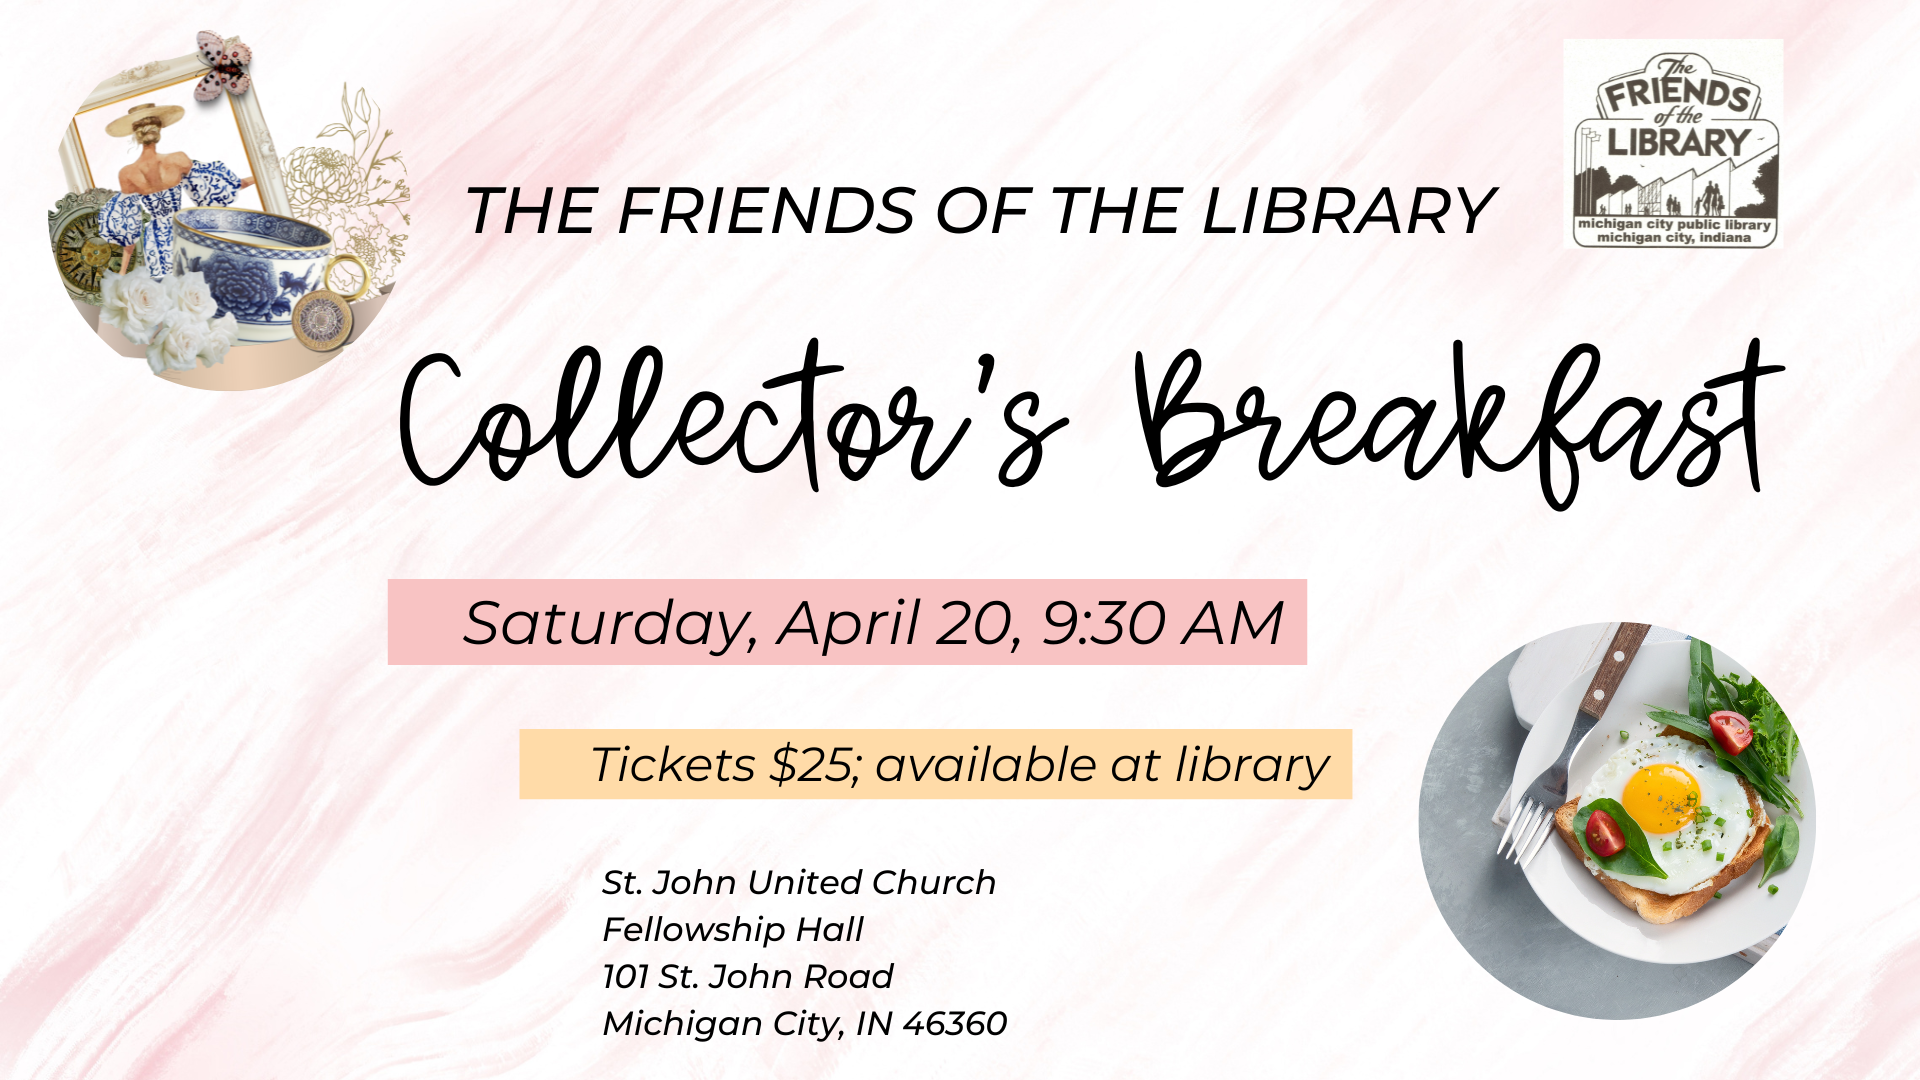 Friends of the Library Collector's Breakfast, Saturday April 20, 9:30 AM, at St. John Church Fellowship Hall. Tickets $25, available for purchase from library